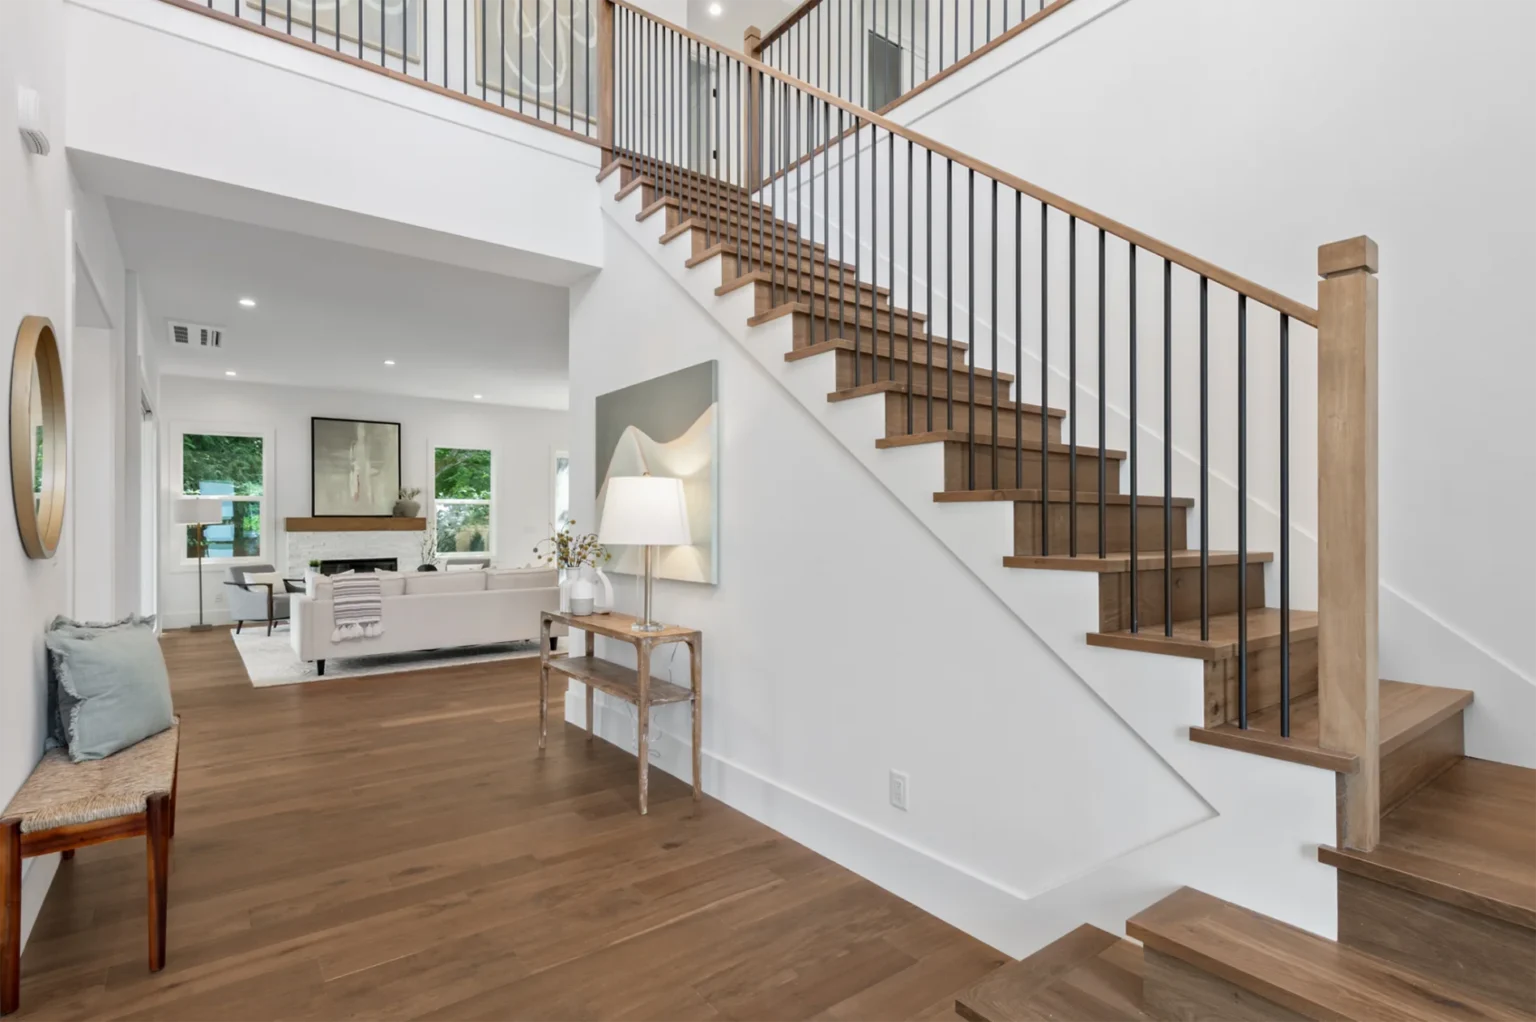 Seattle Transitional Style Home Interior Entry Way Staircase